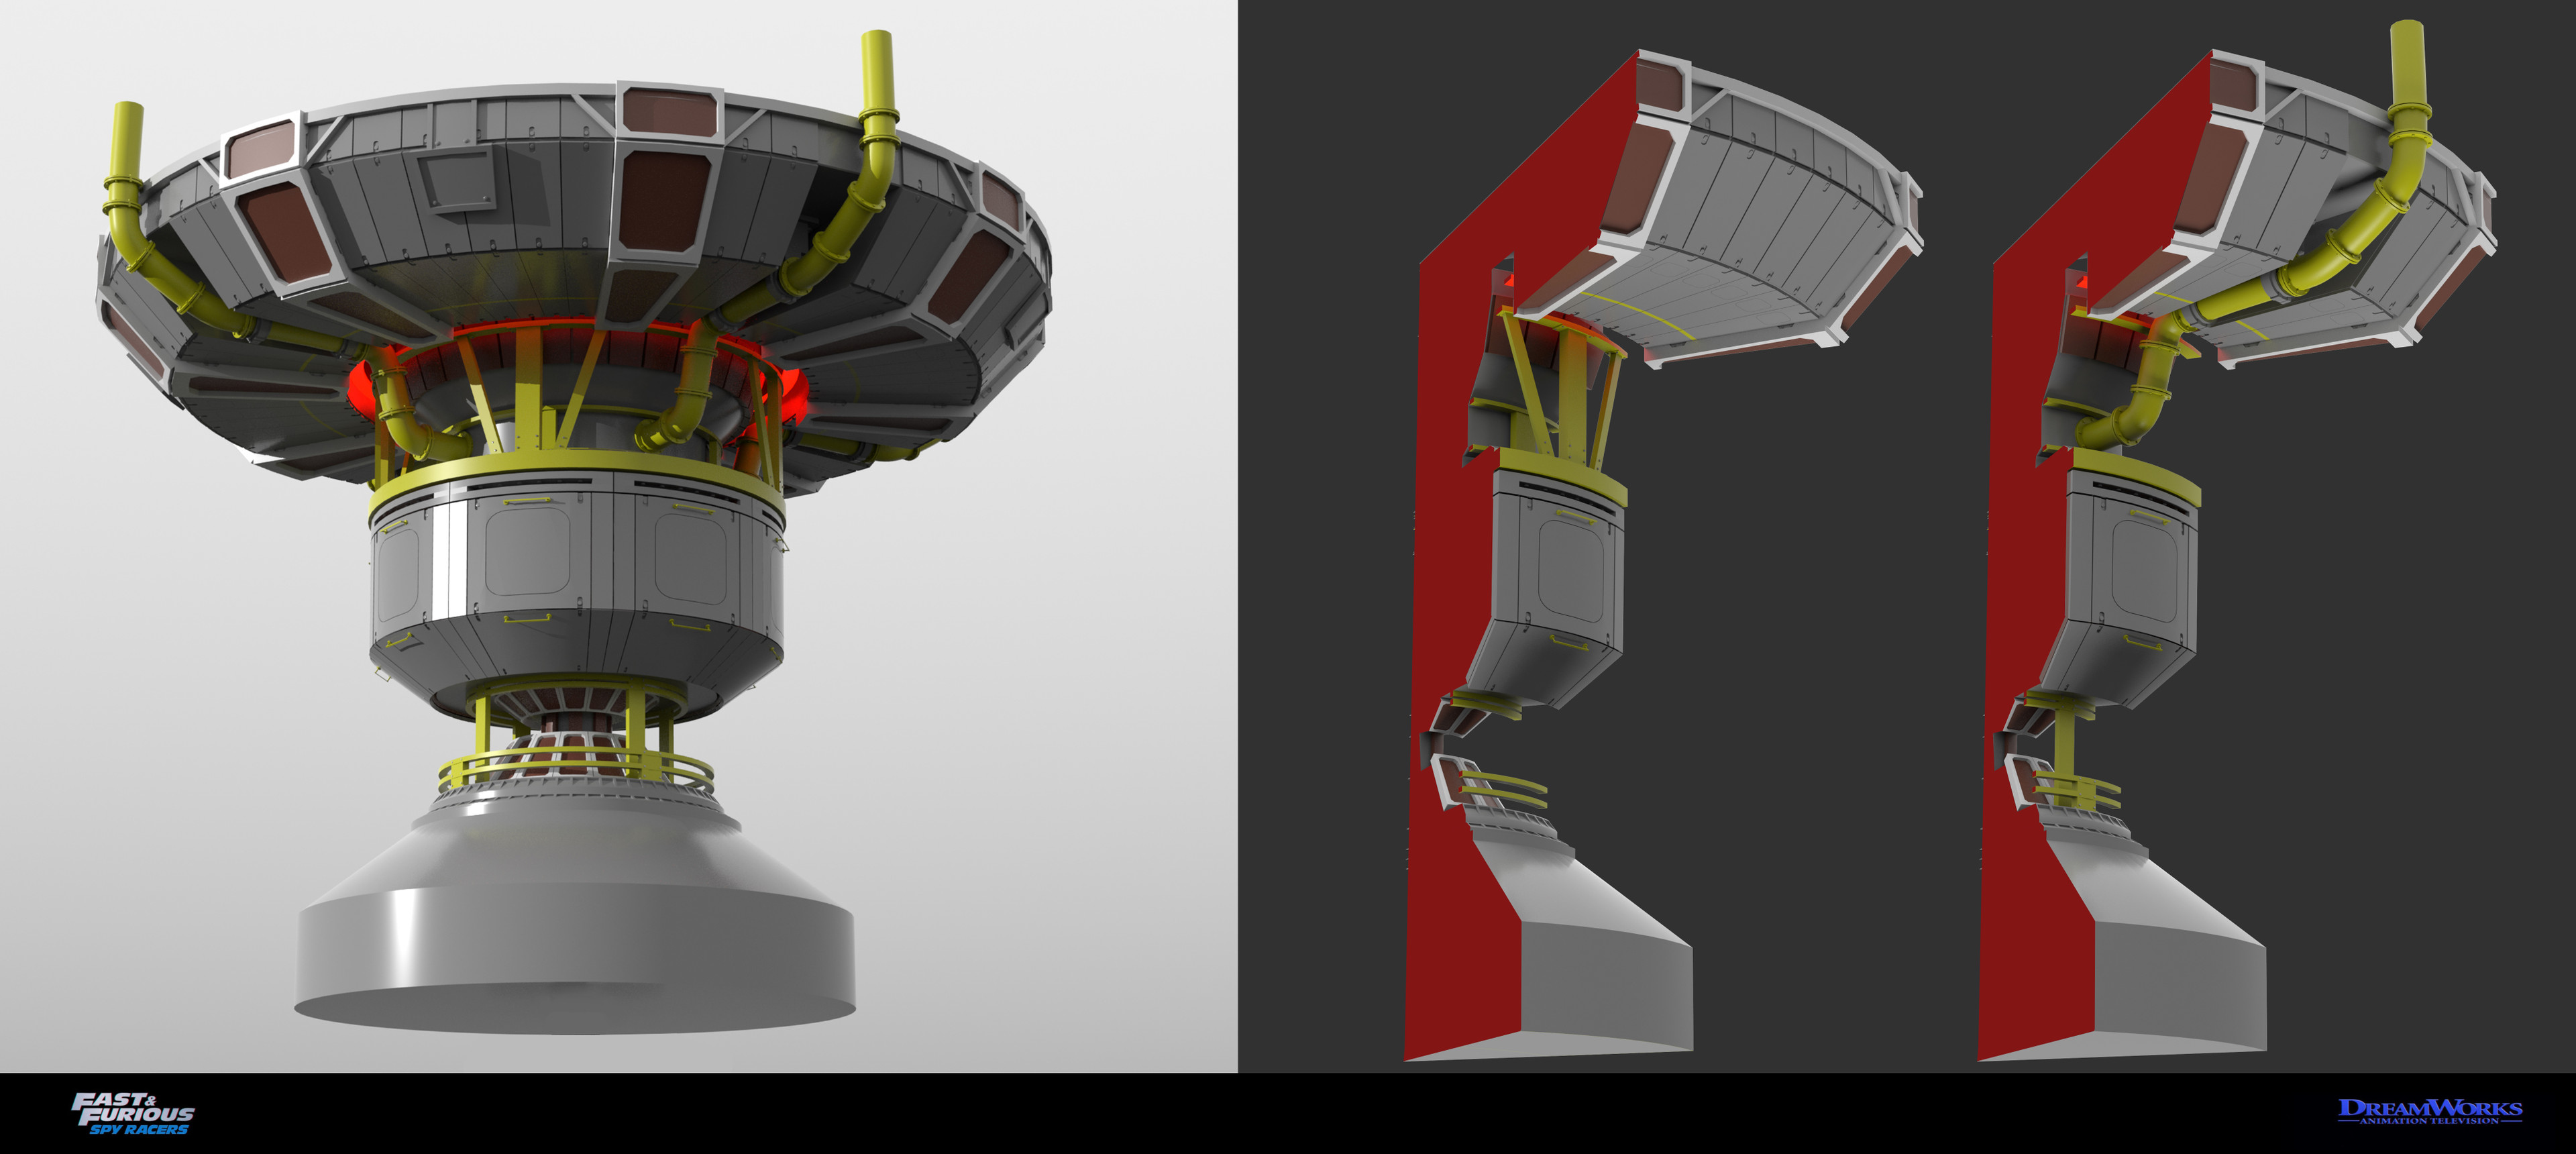 My model done in Modo to simplify the design down and optimize into 8 radial segments. This turned out to be important for the CG team to have as a modular base.